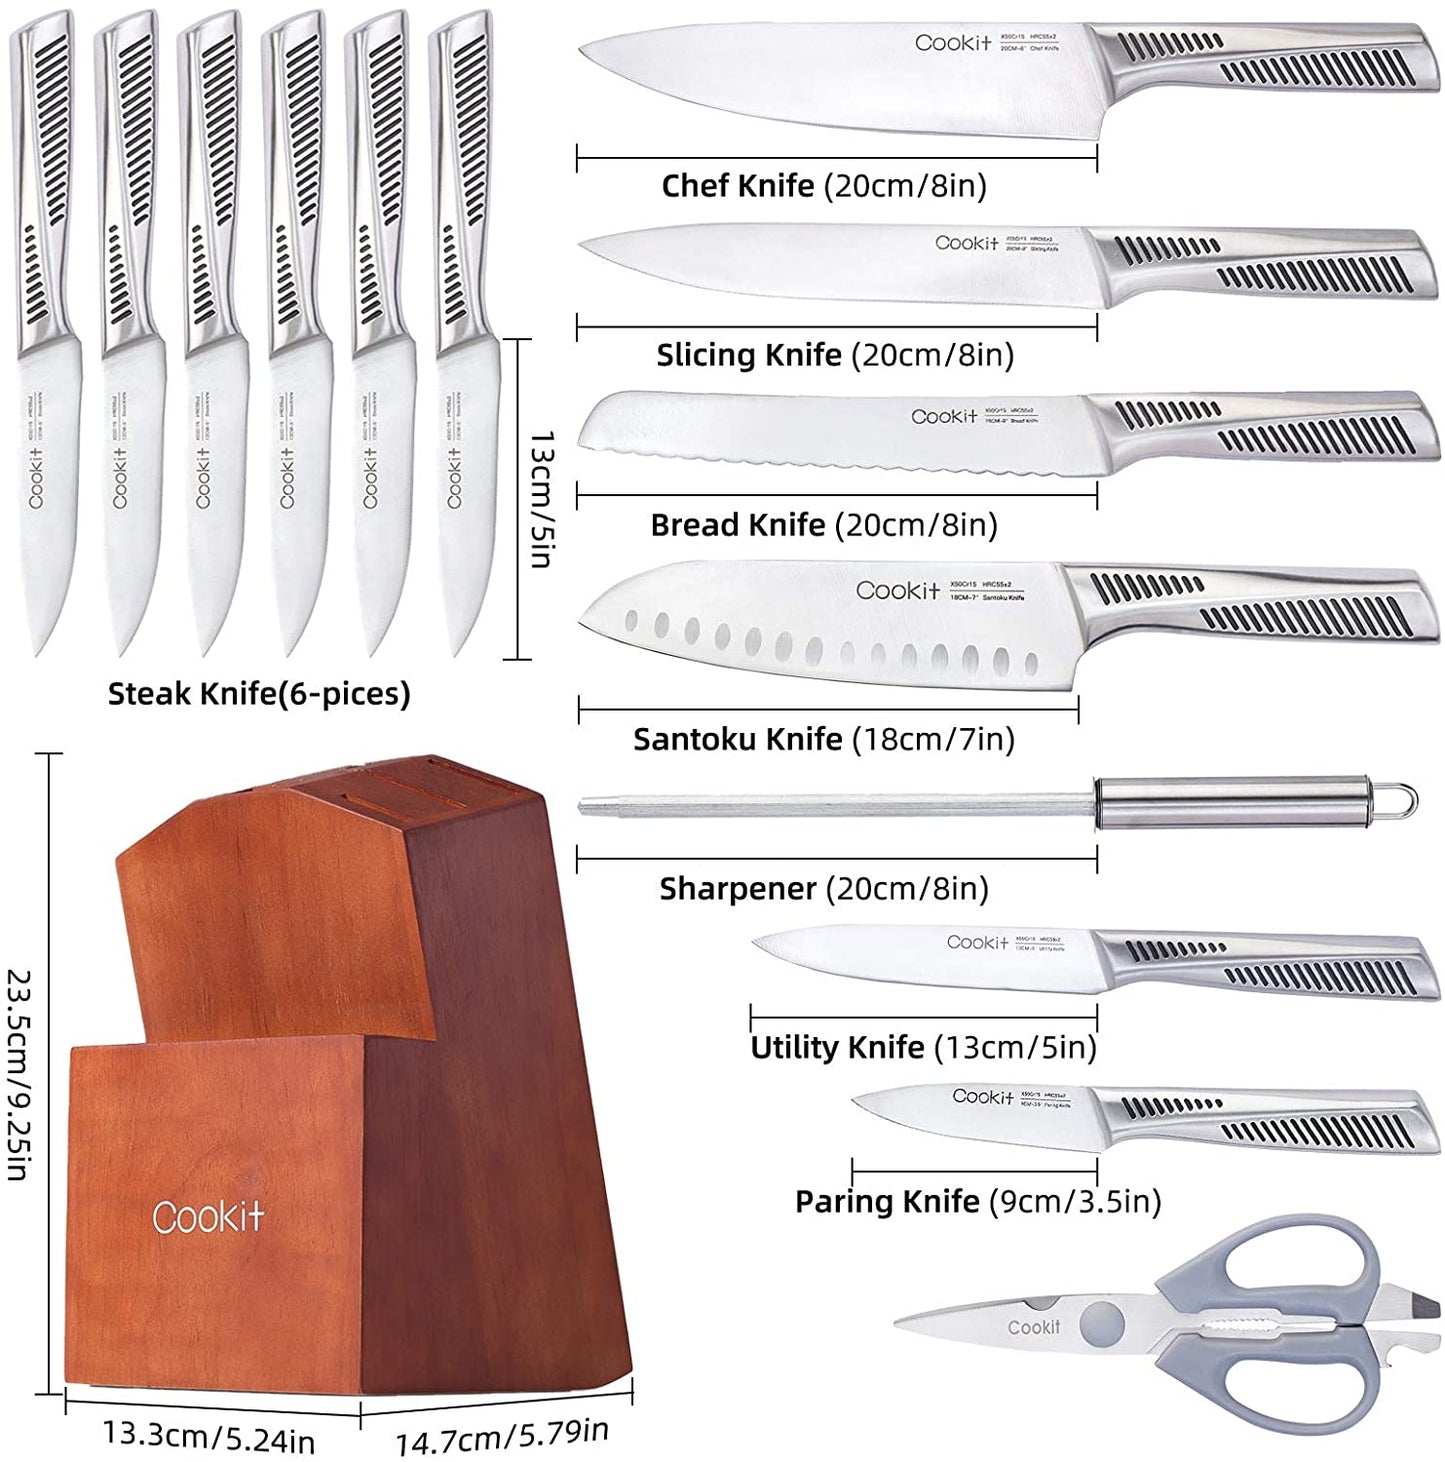 Kitchen Knife Set, 15 Piece Knife Sets with Block Chef Knife Stainless Steel Hollow Handle Cutlery with Manual Sharpener Amazon Platform Banned